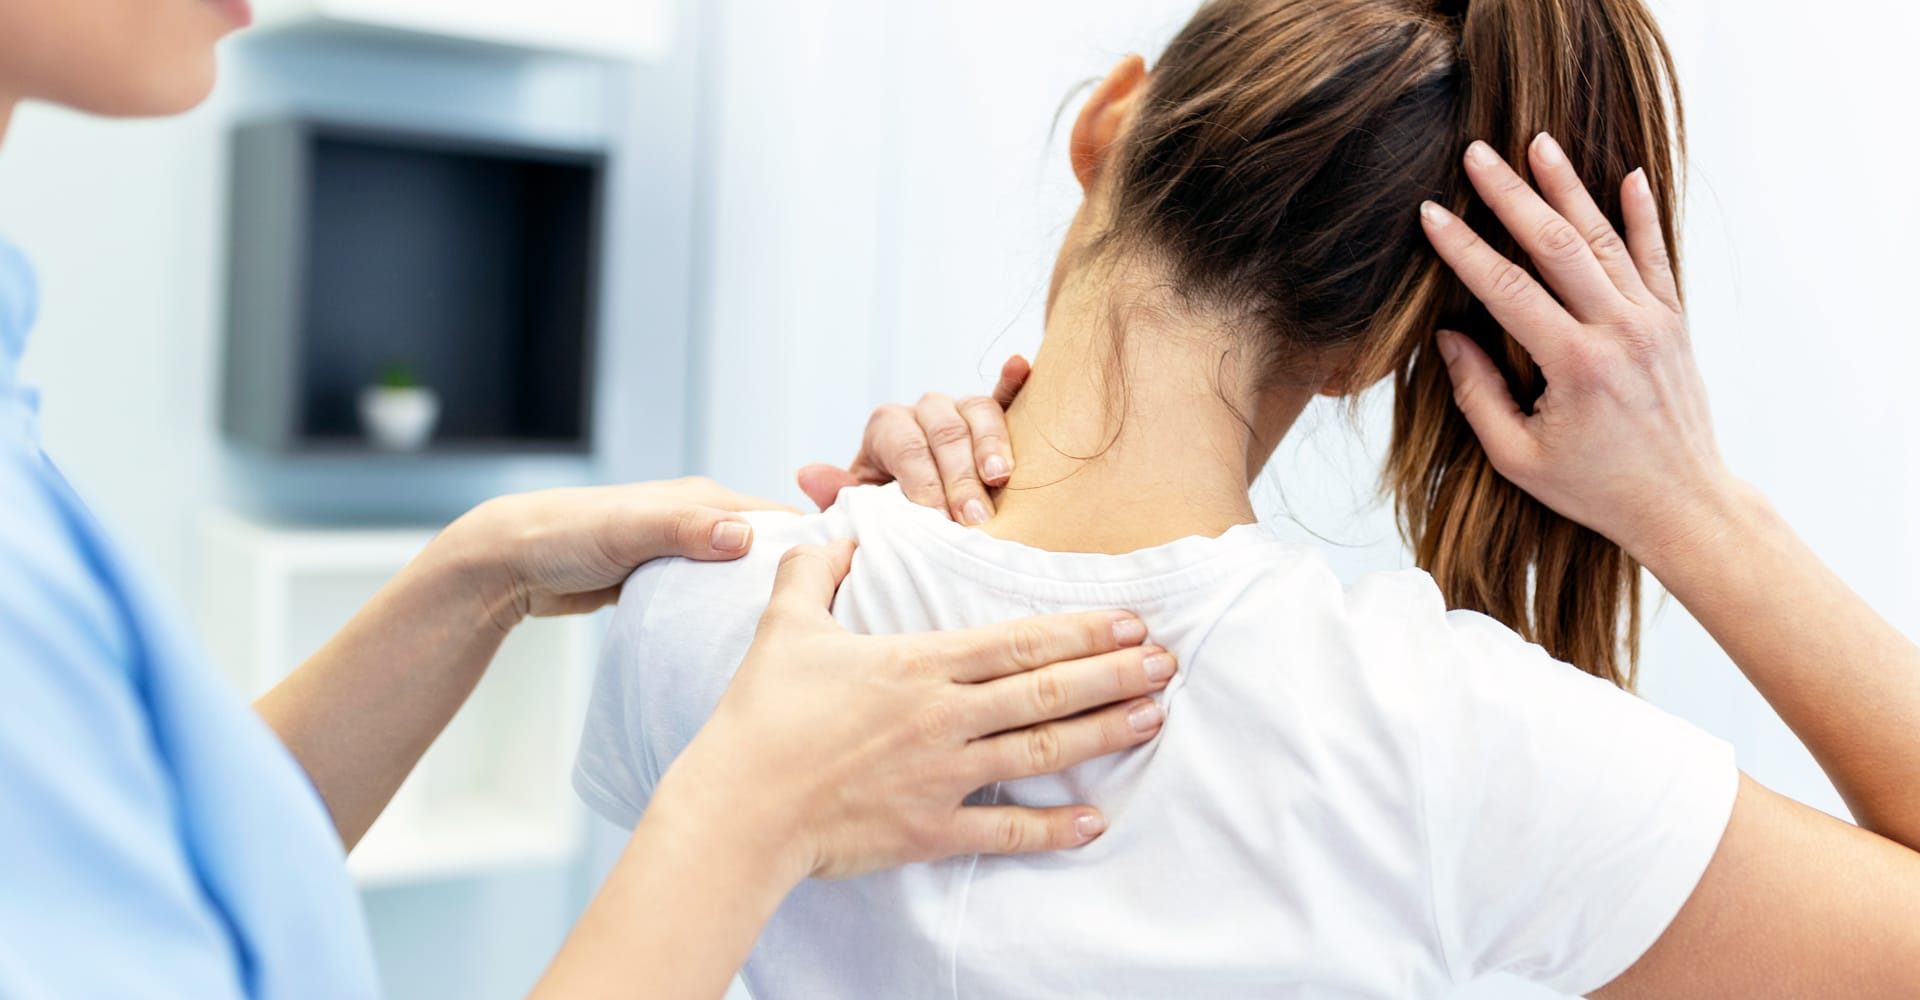 Close-up of a health care provider helping a patient with what appear to be neck and shoulder issues